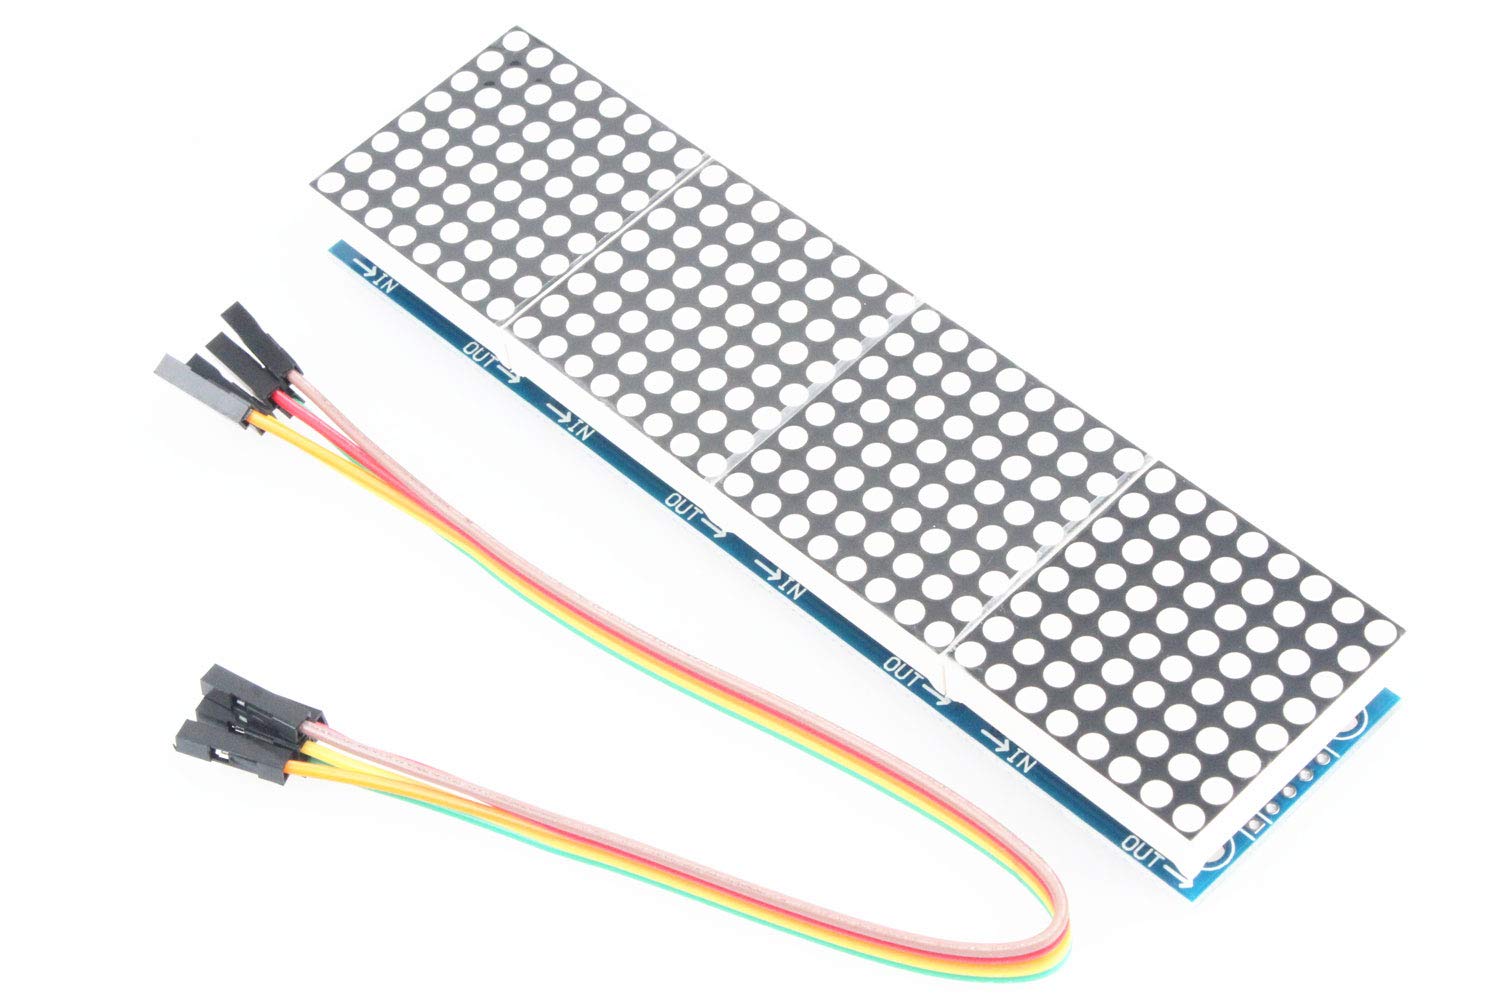 NOYITO MAX7219 Dot Matrix Module 4 in 1 Display Module Blue Red Green Three Colors with 5Pin Wire - Upgrade (Blue)